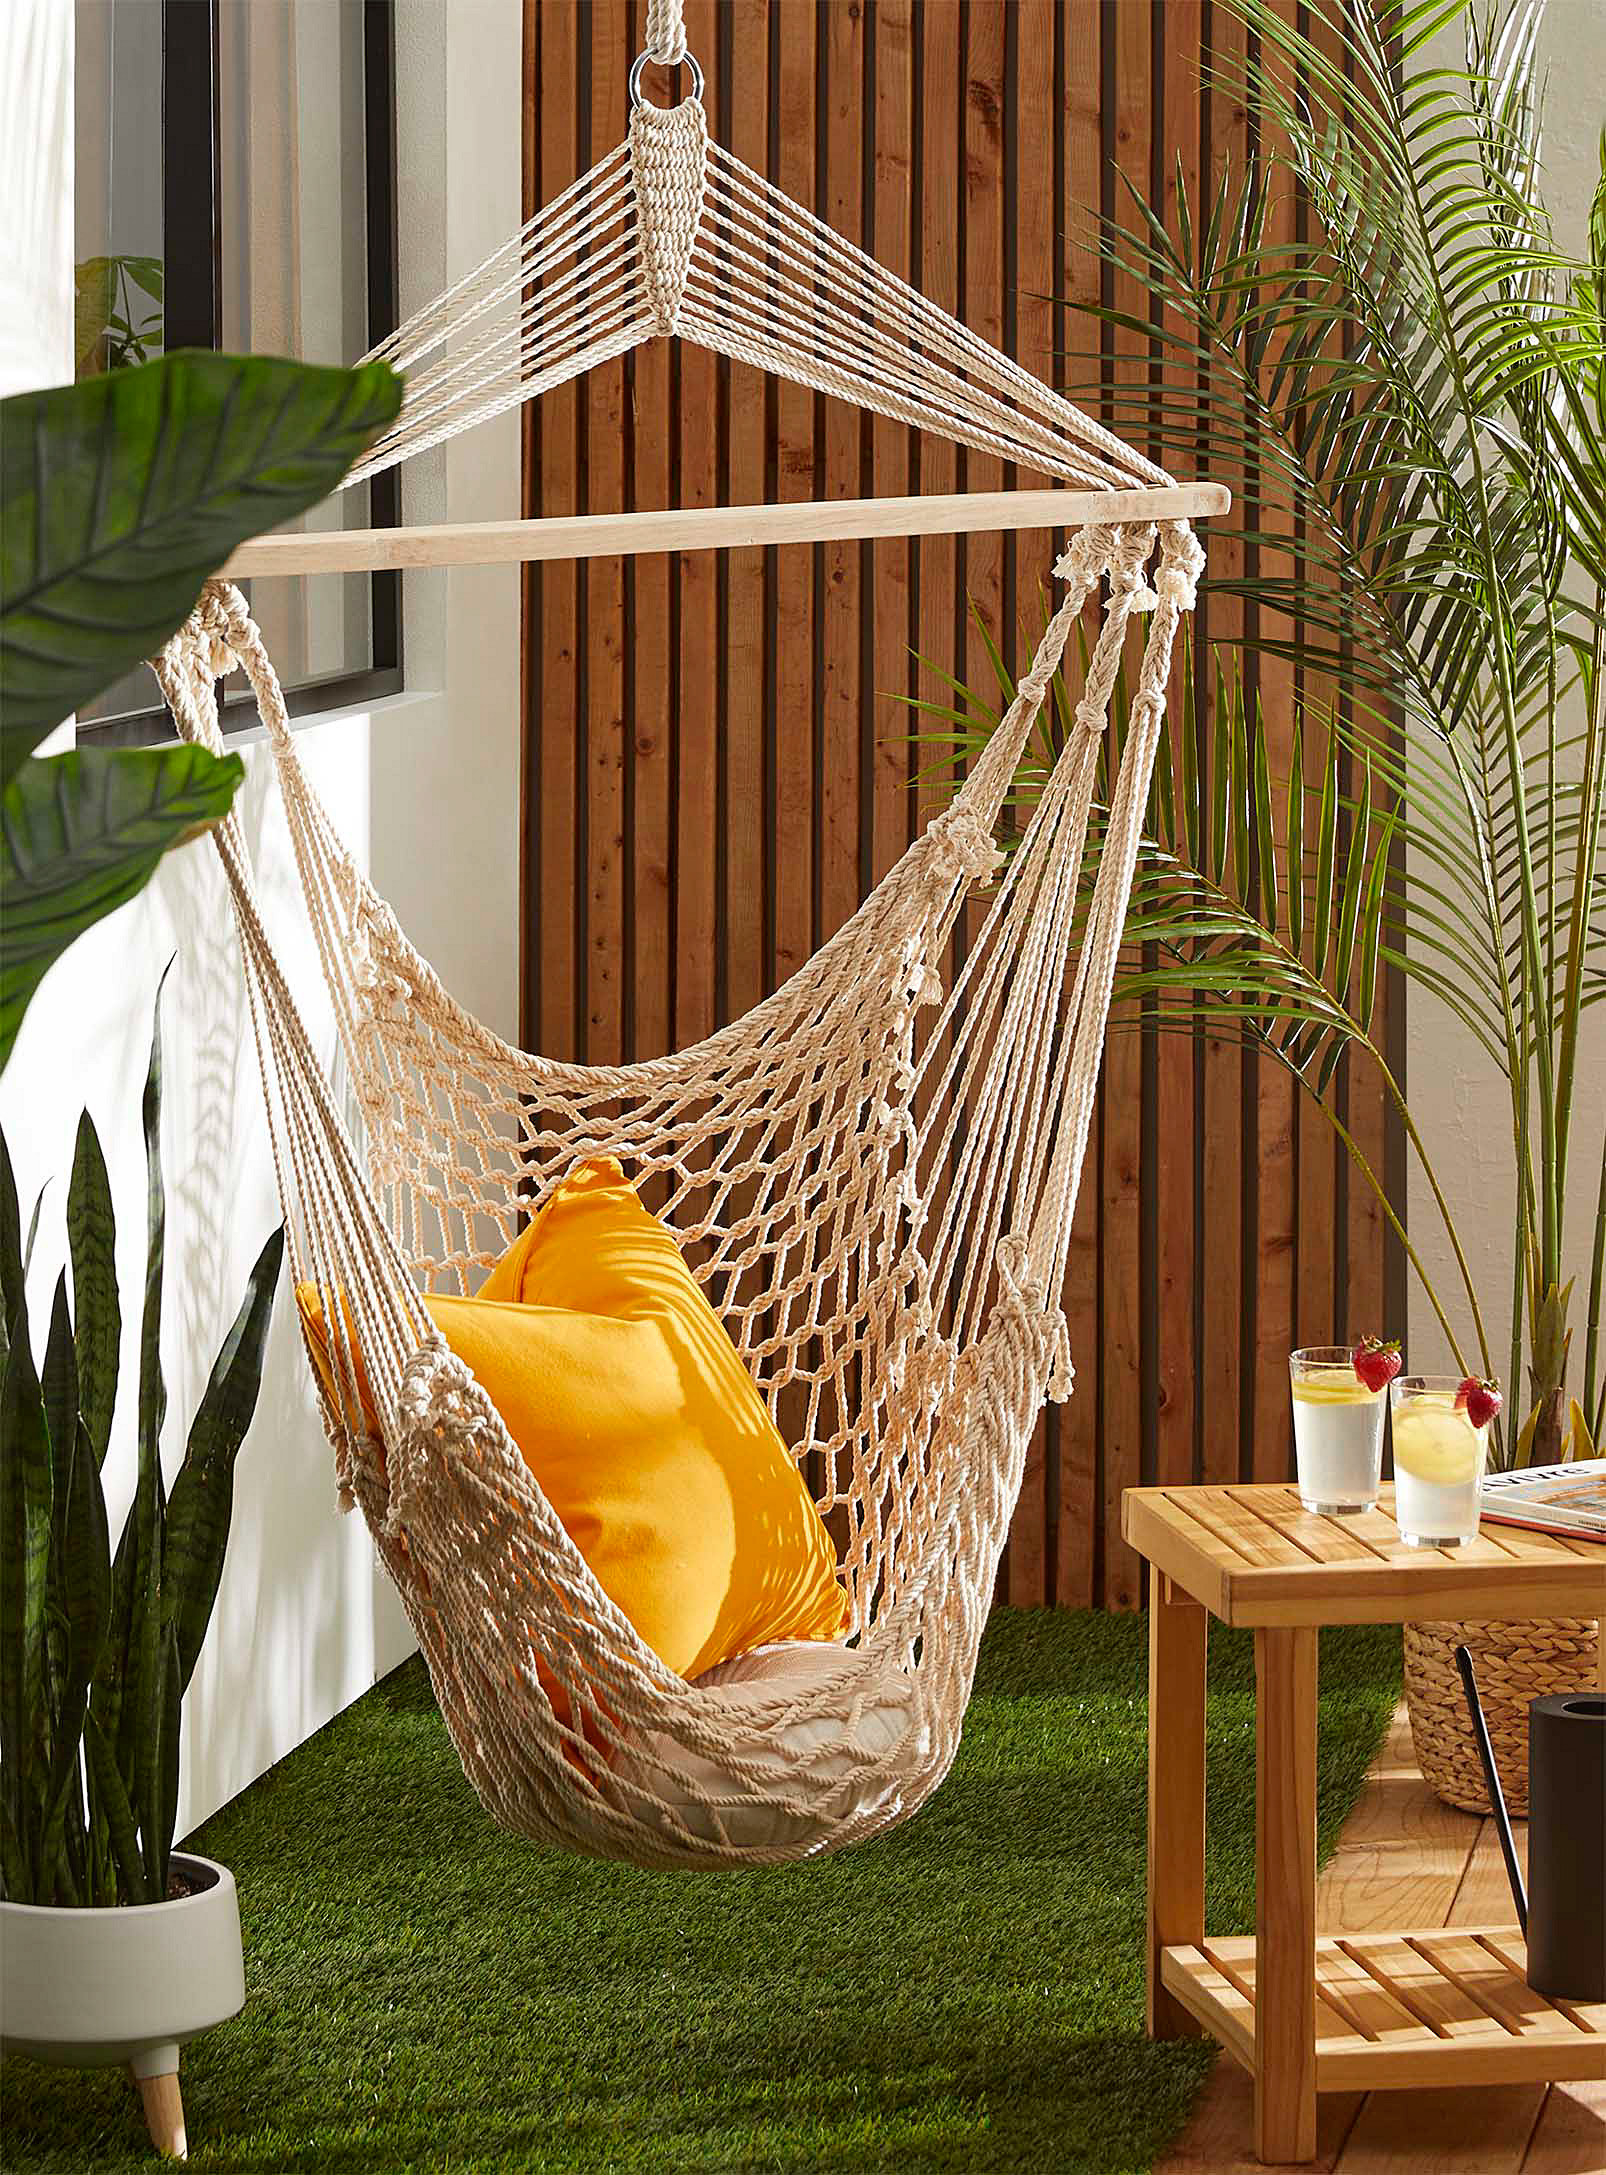 The hanging chair in a beachy interior